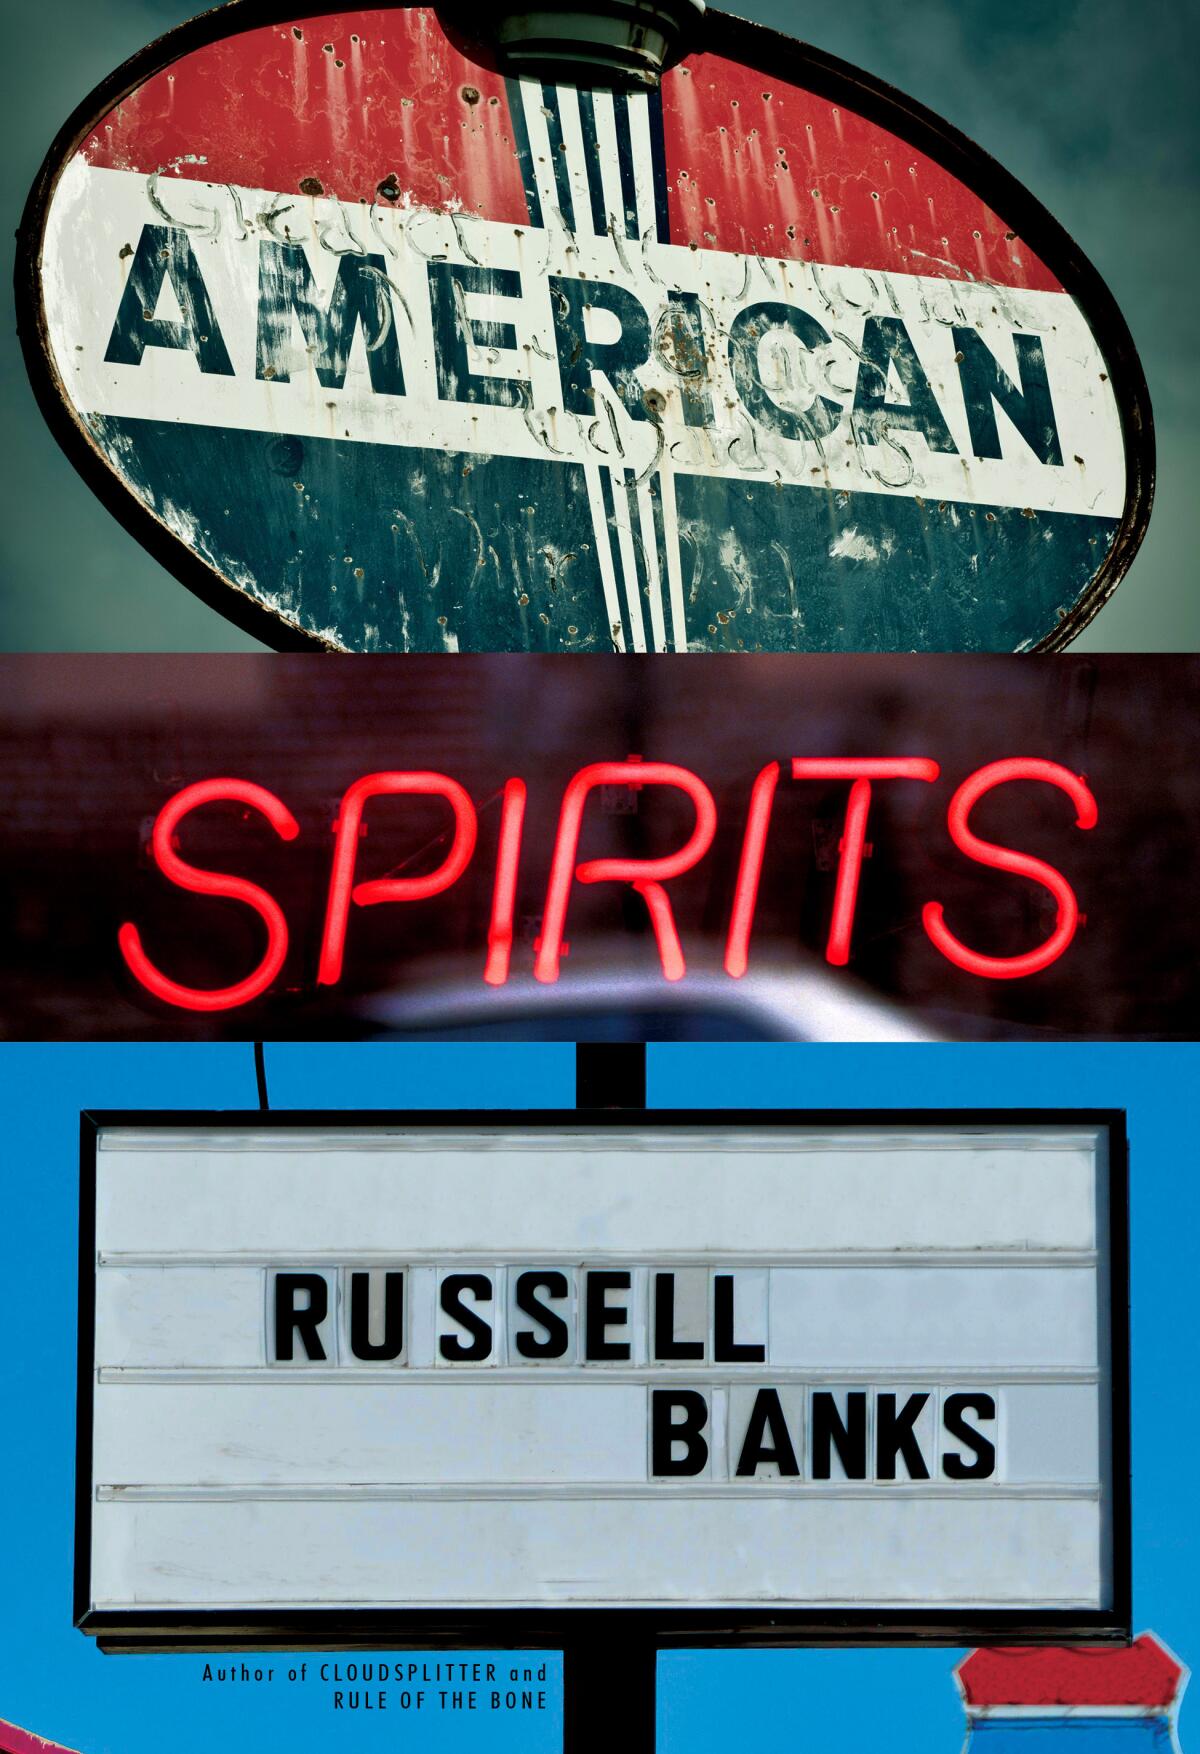 Book jacket for "American Spirits" by Russell Banks